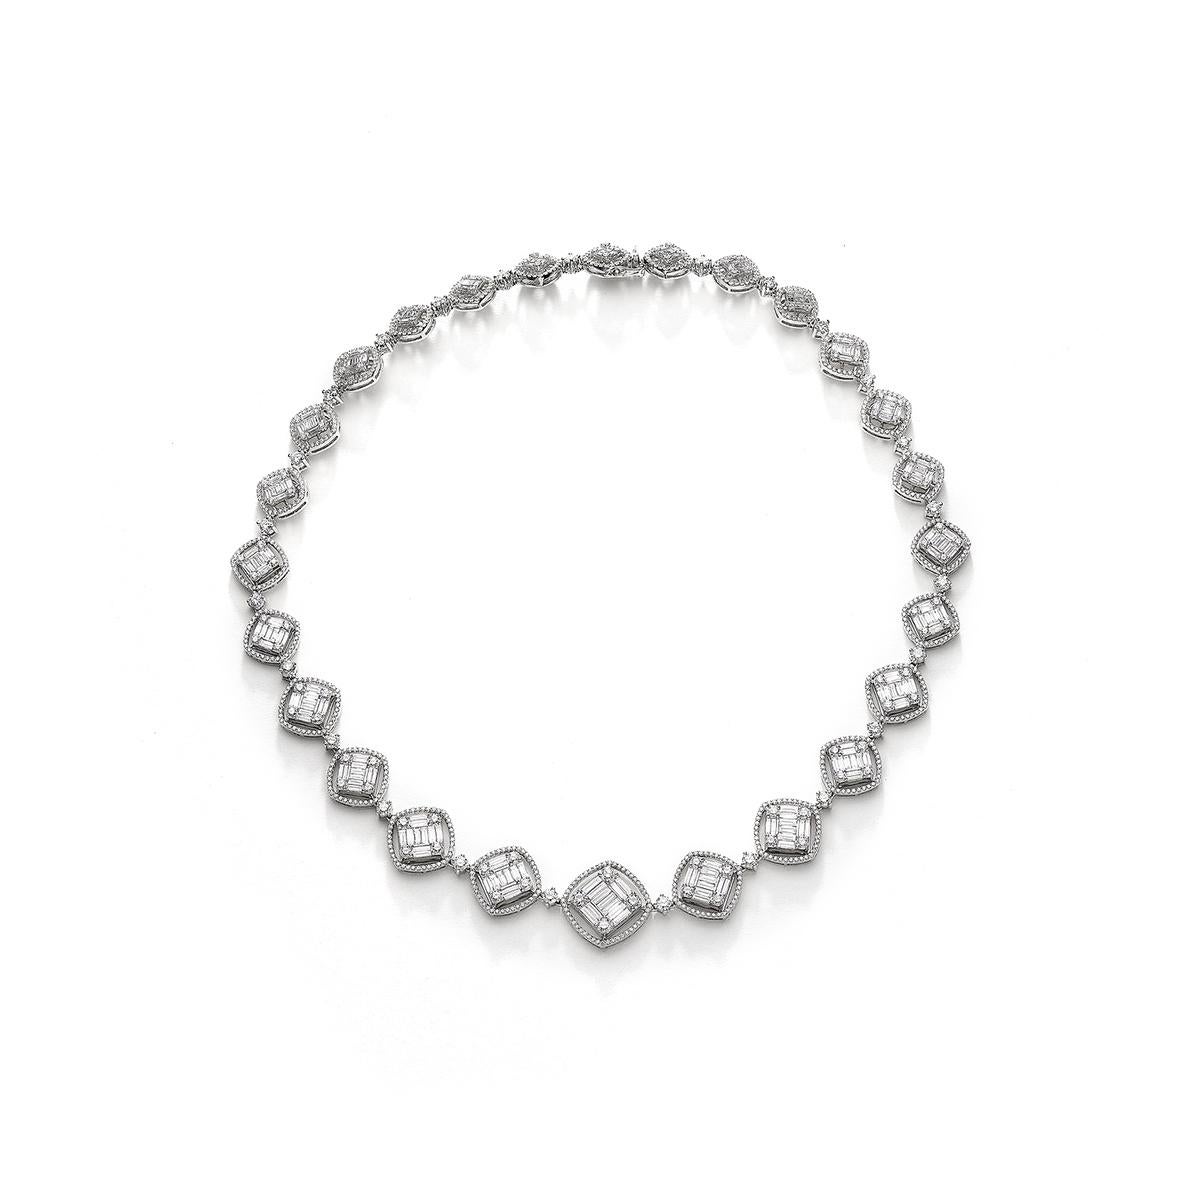 Necklace in 18kt white gold set with 207 baguette cut diamonds 6.65 cts and 947 diamonds 9.39 cts